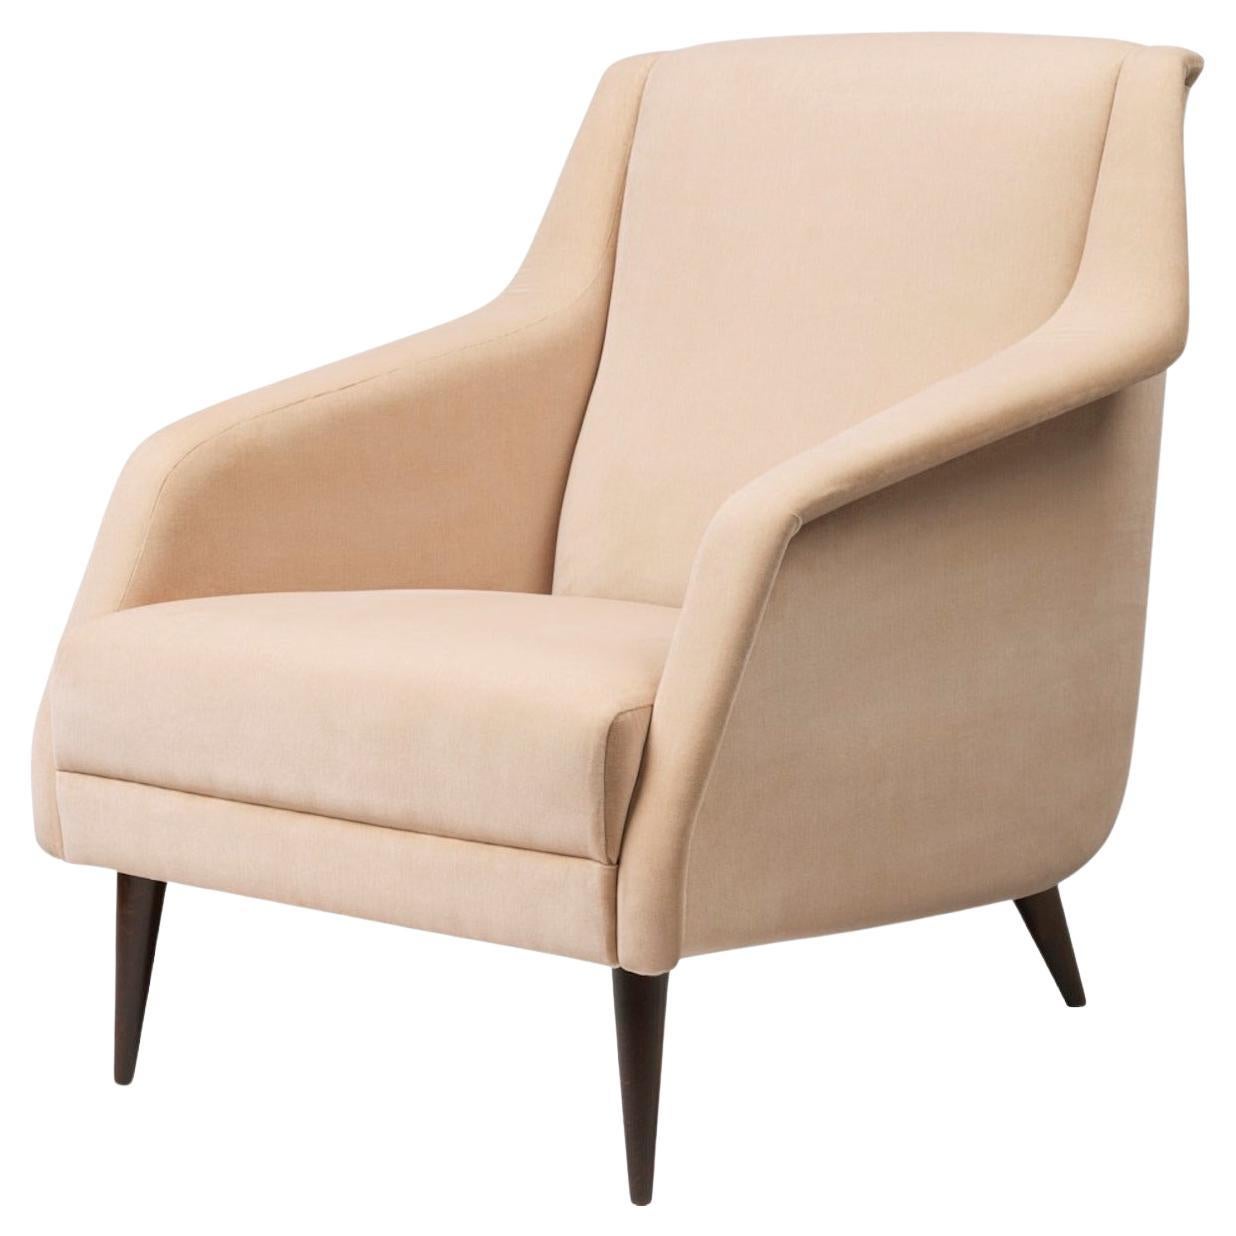 Customizable Gubi CDC Lounge Chair Fully Upholstered Designed by Carlo de Carli